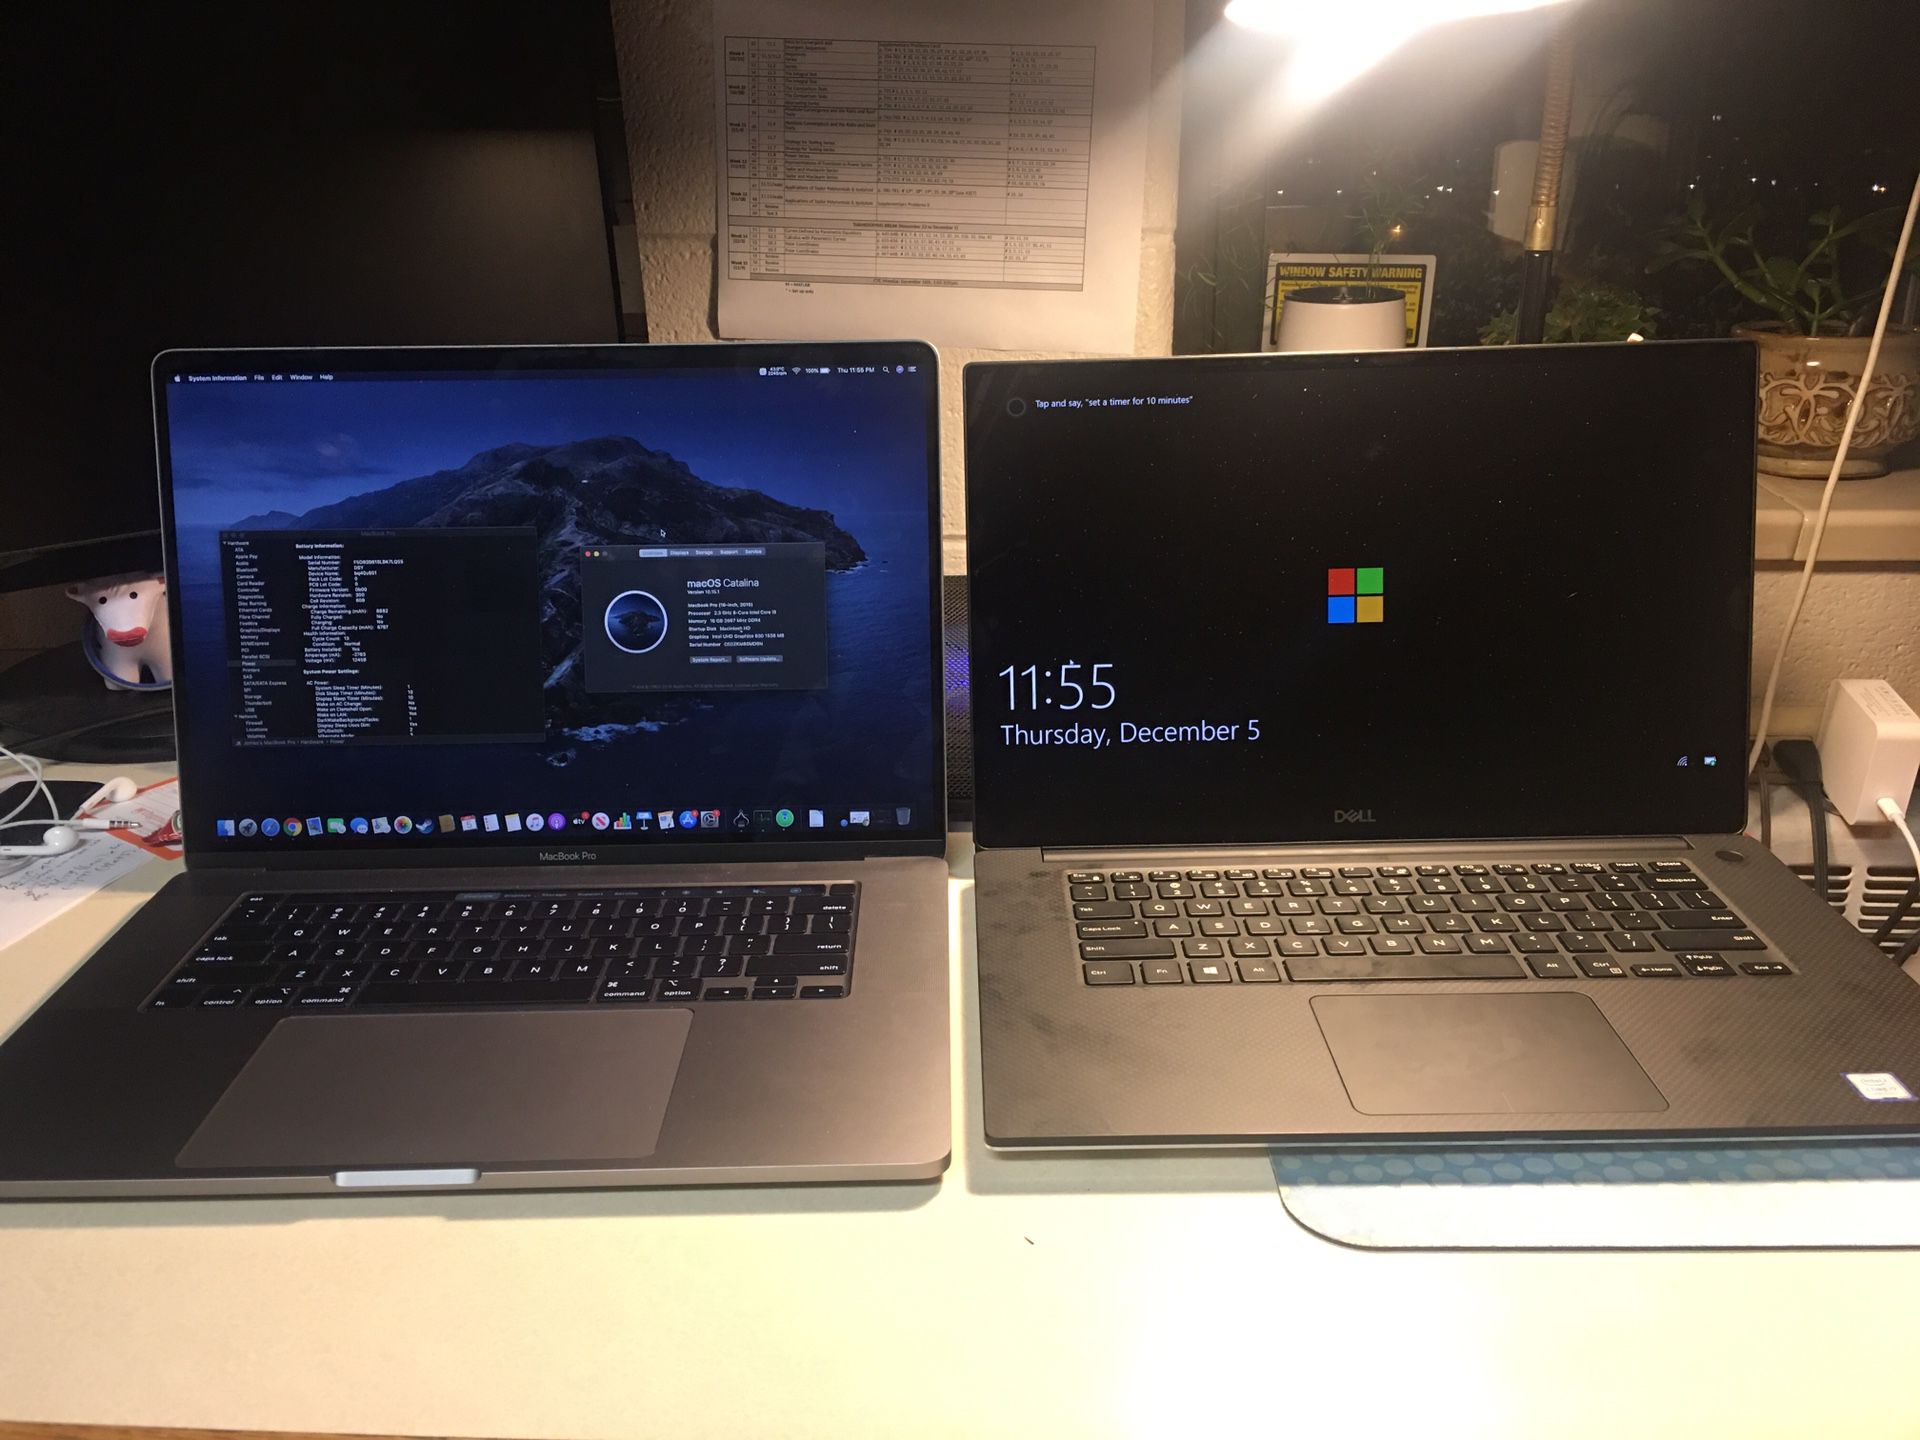 2 Laptops (Dell and Apple) price is for both